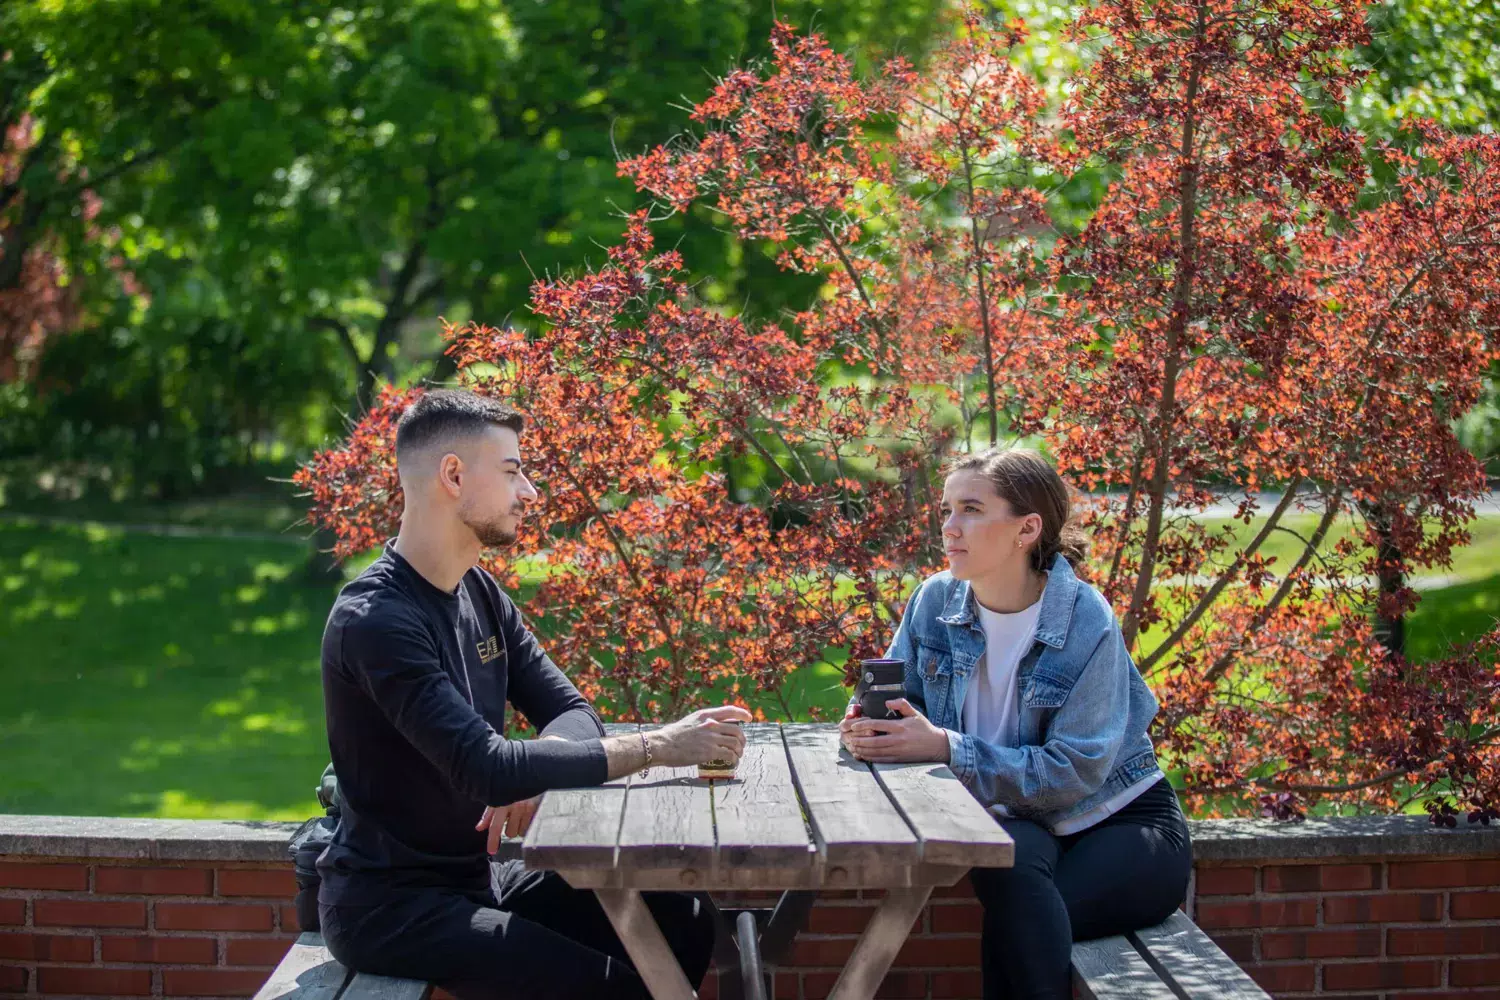 Two students are sitting by a table with take-away coffee cups. Green bushes are seen in the background.